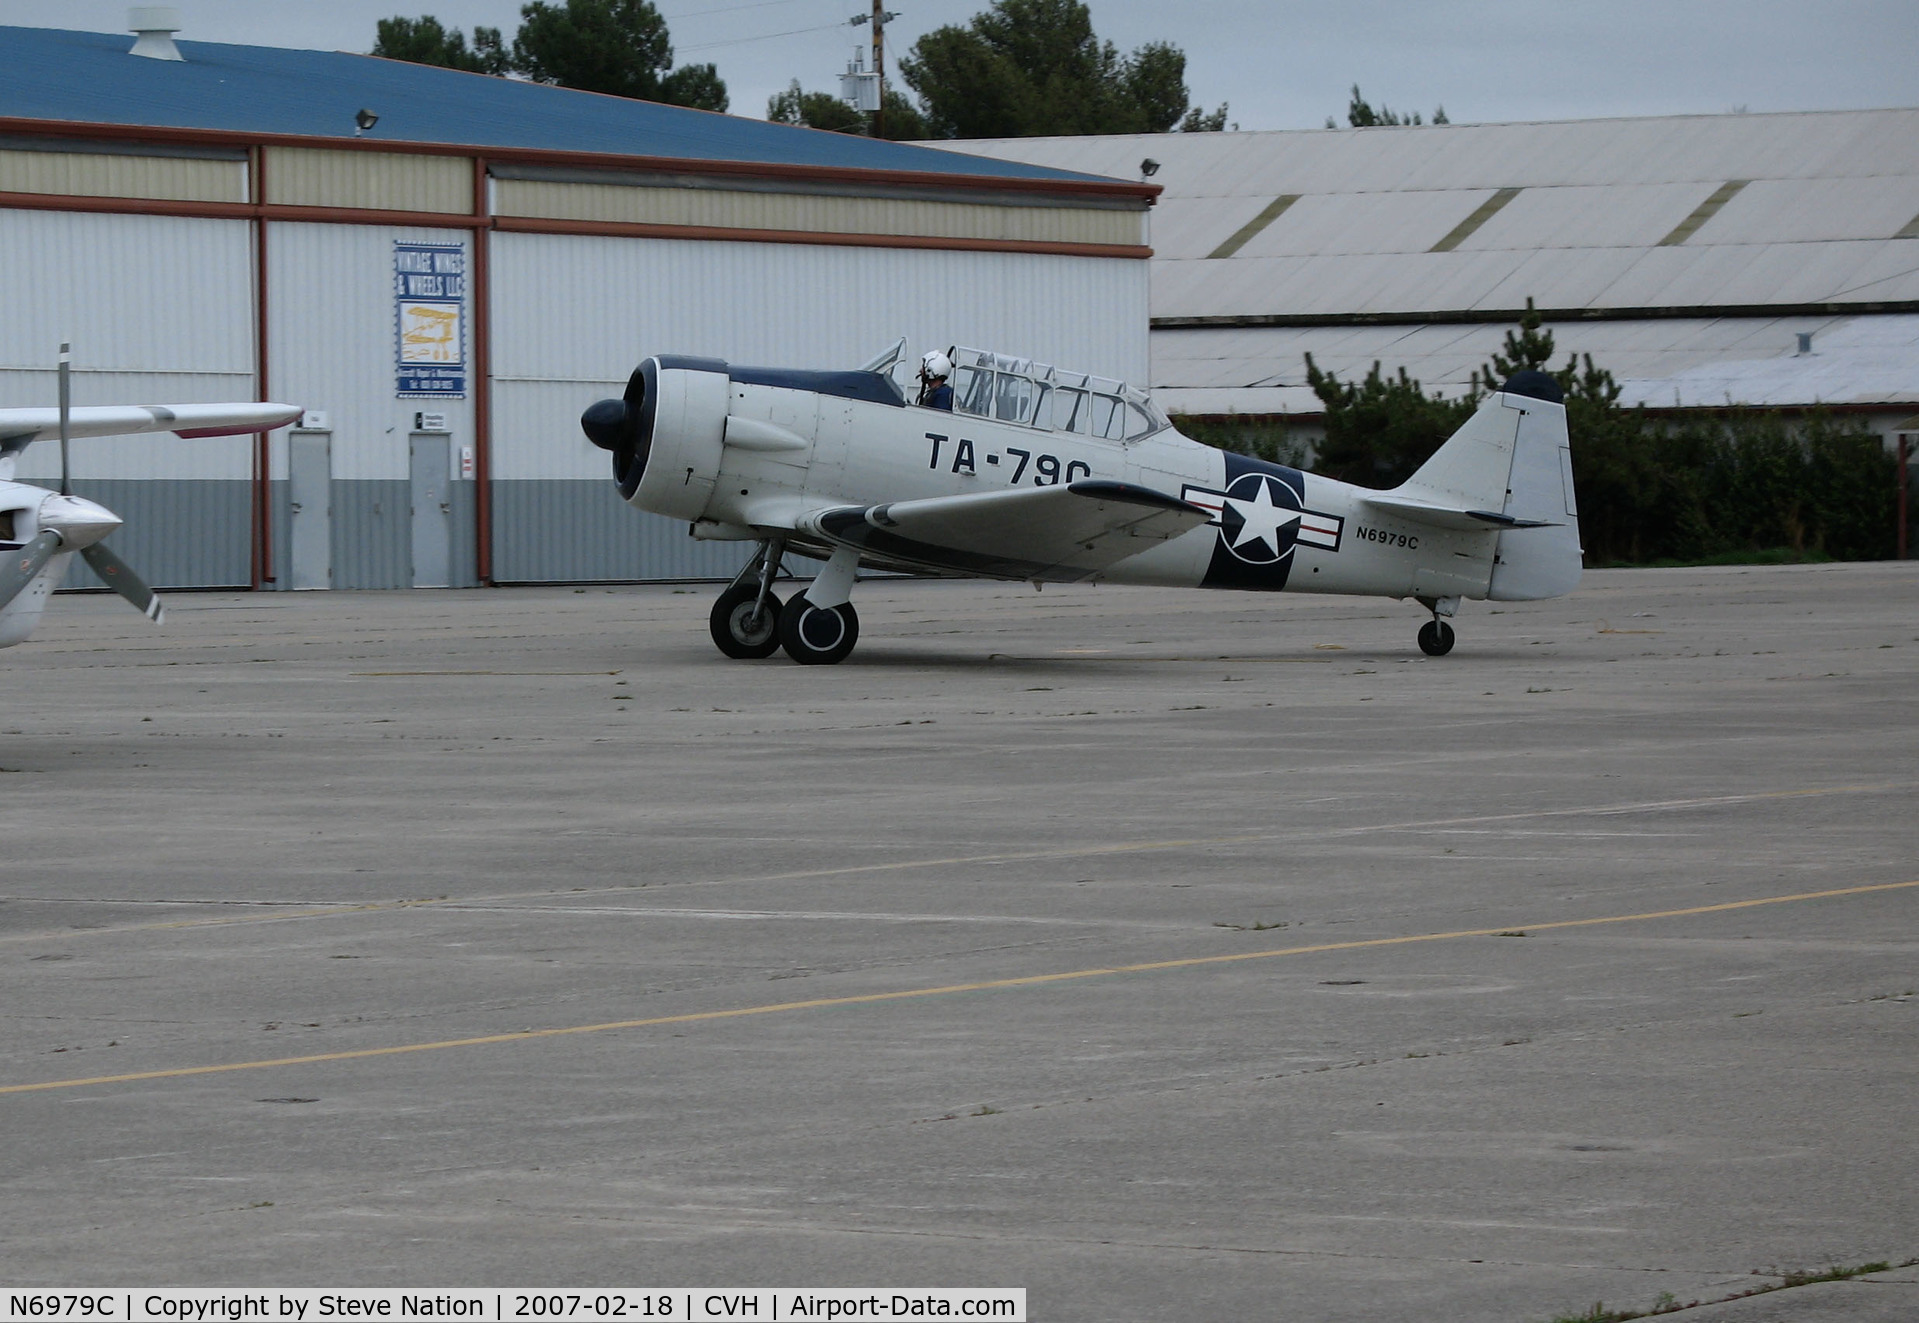 N6979C, North American AT-6D Texan C/N 42-85408, North American AT-6D in USAF c/s with TA-79C code taxiing for fuel @ Hollister Municipal Airport, CA